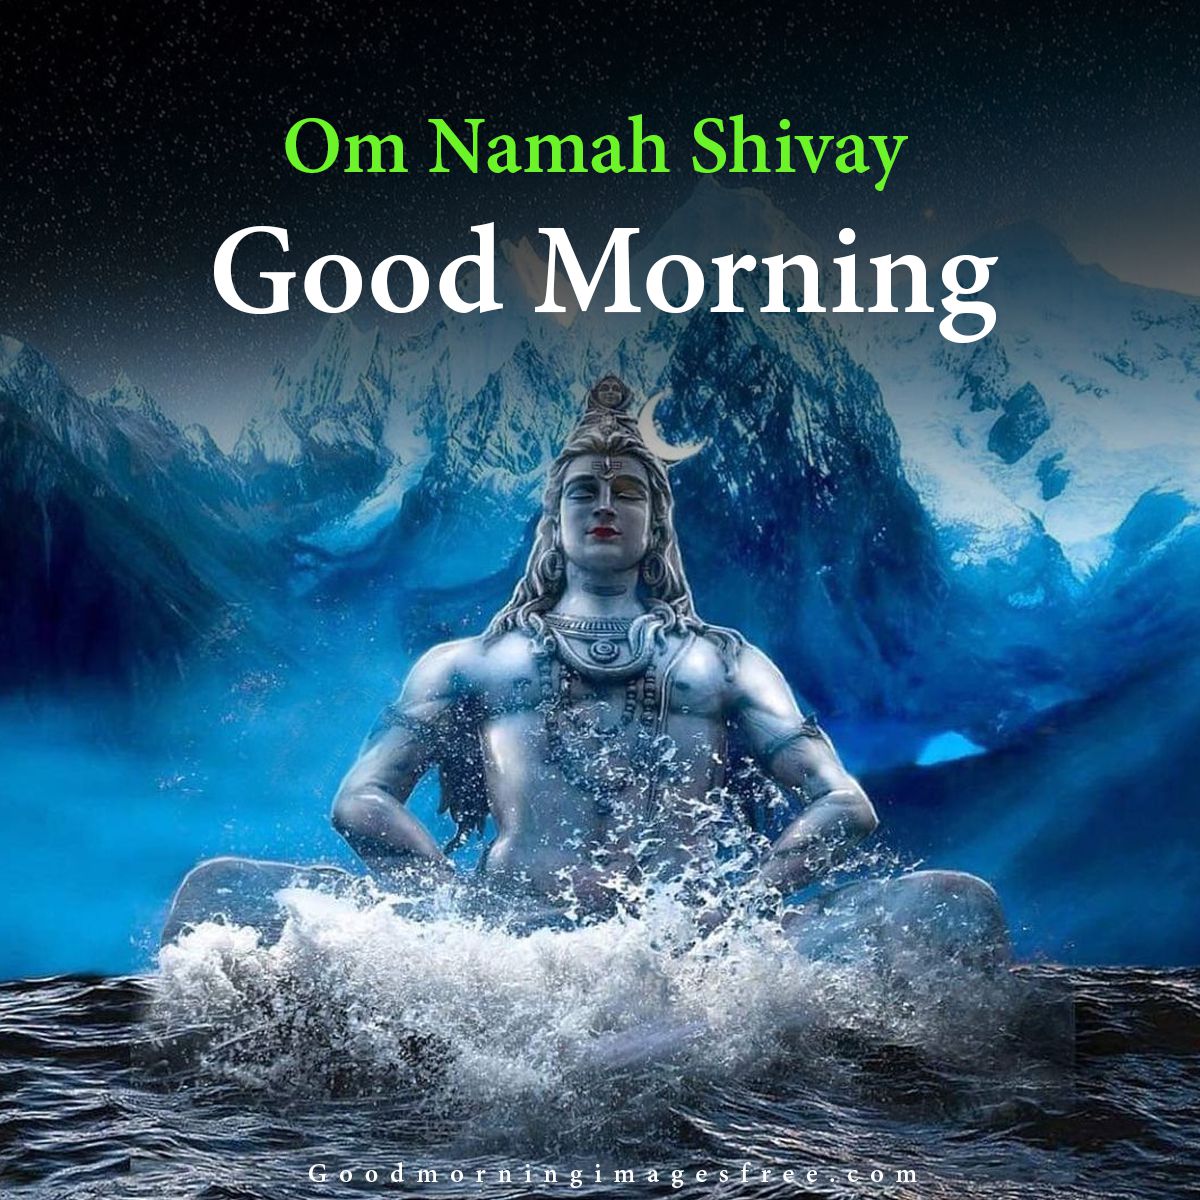 Over 999+ Spectacular Shiva Good Morning Images – Full 4K Collection of Shiva Good Morning Images